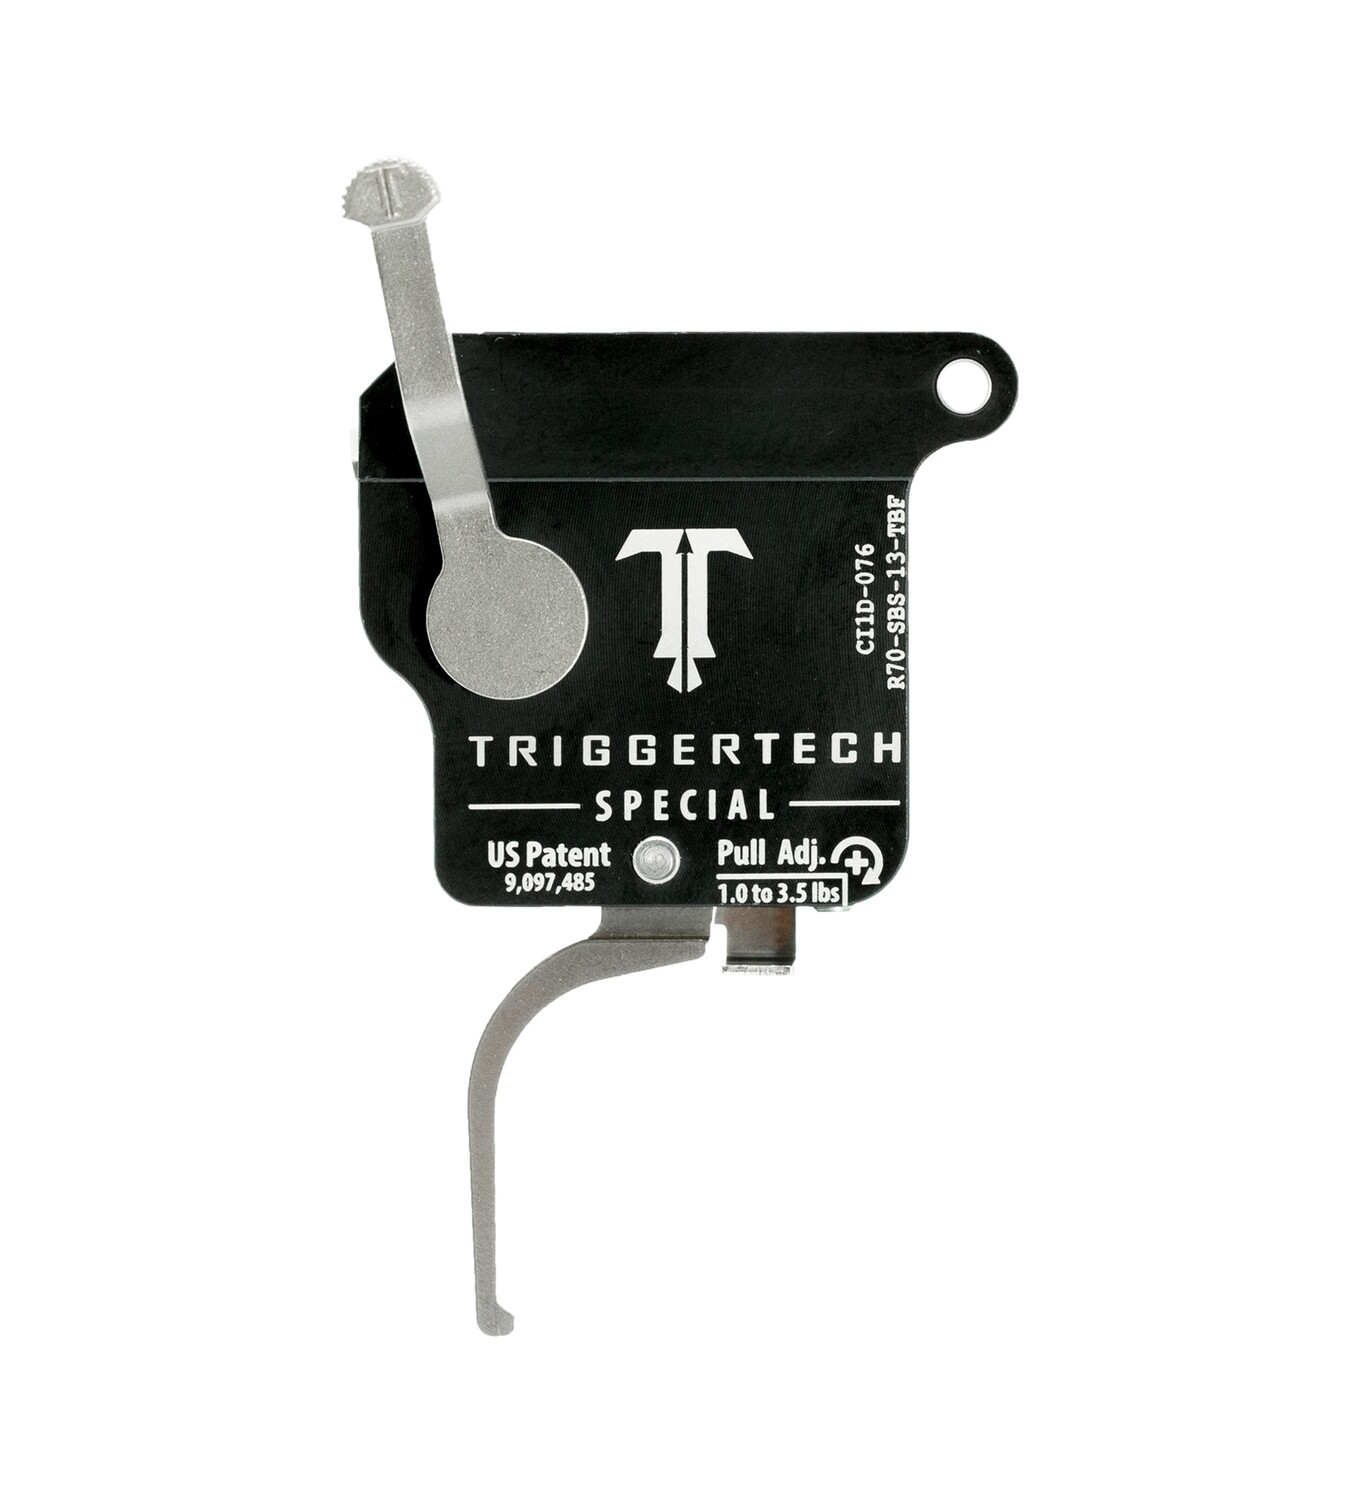 TriggerTech Special 1-3.5lb Flat Stainless Trigger for Remington 700